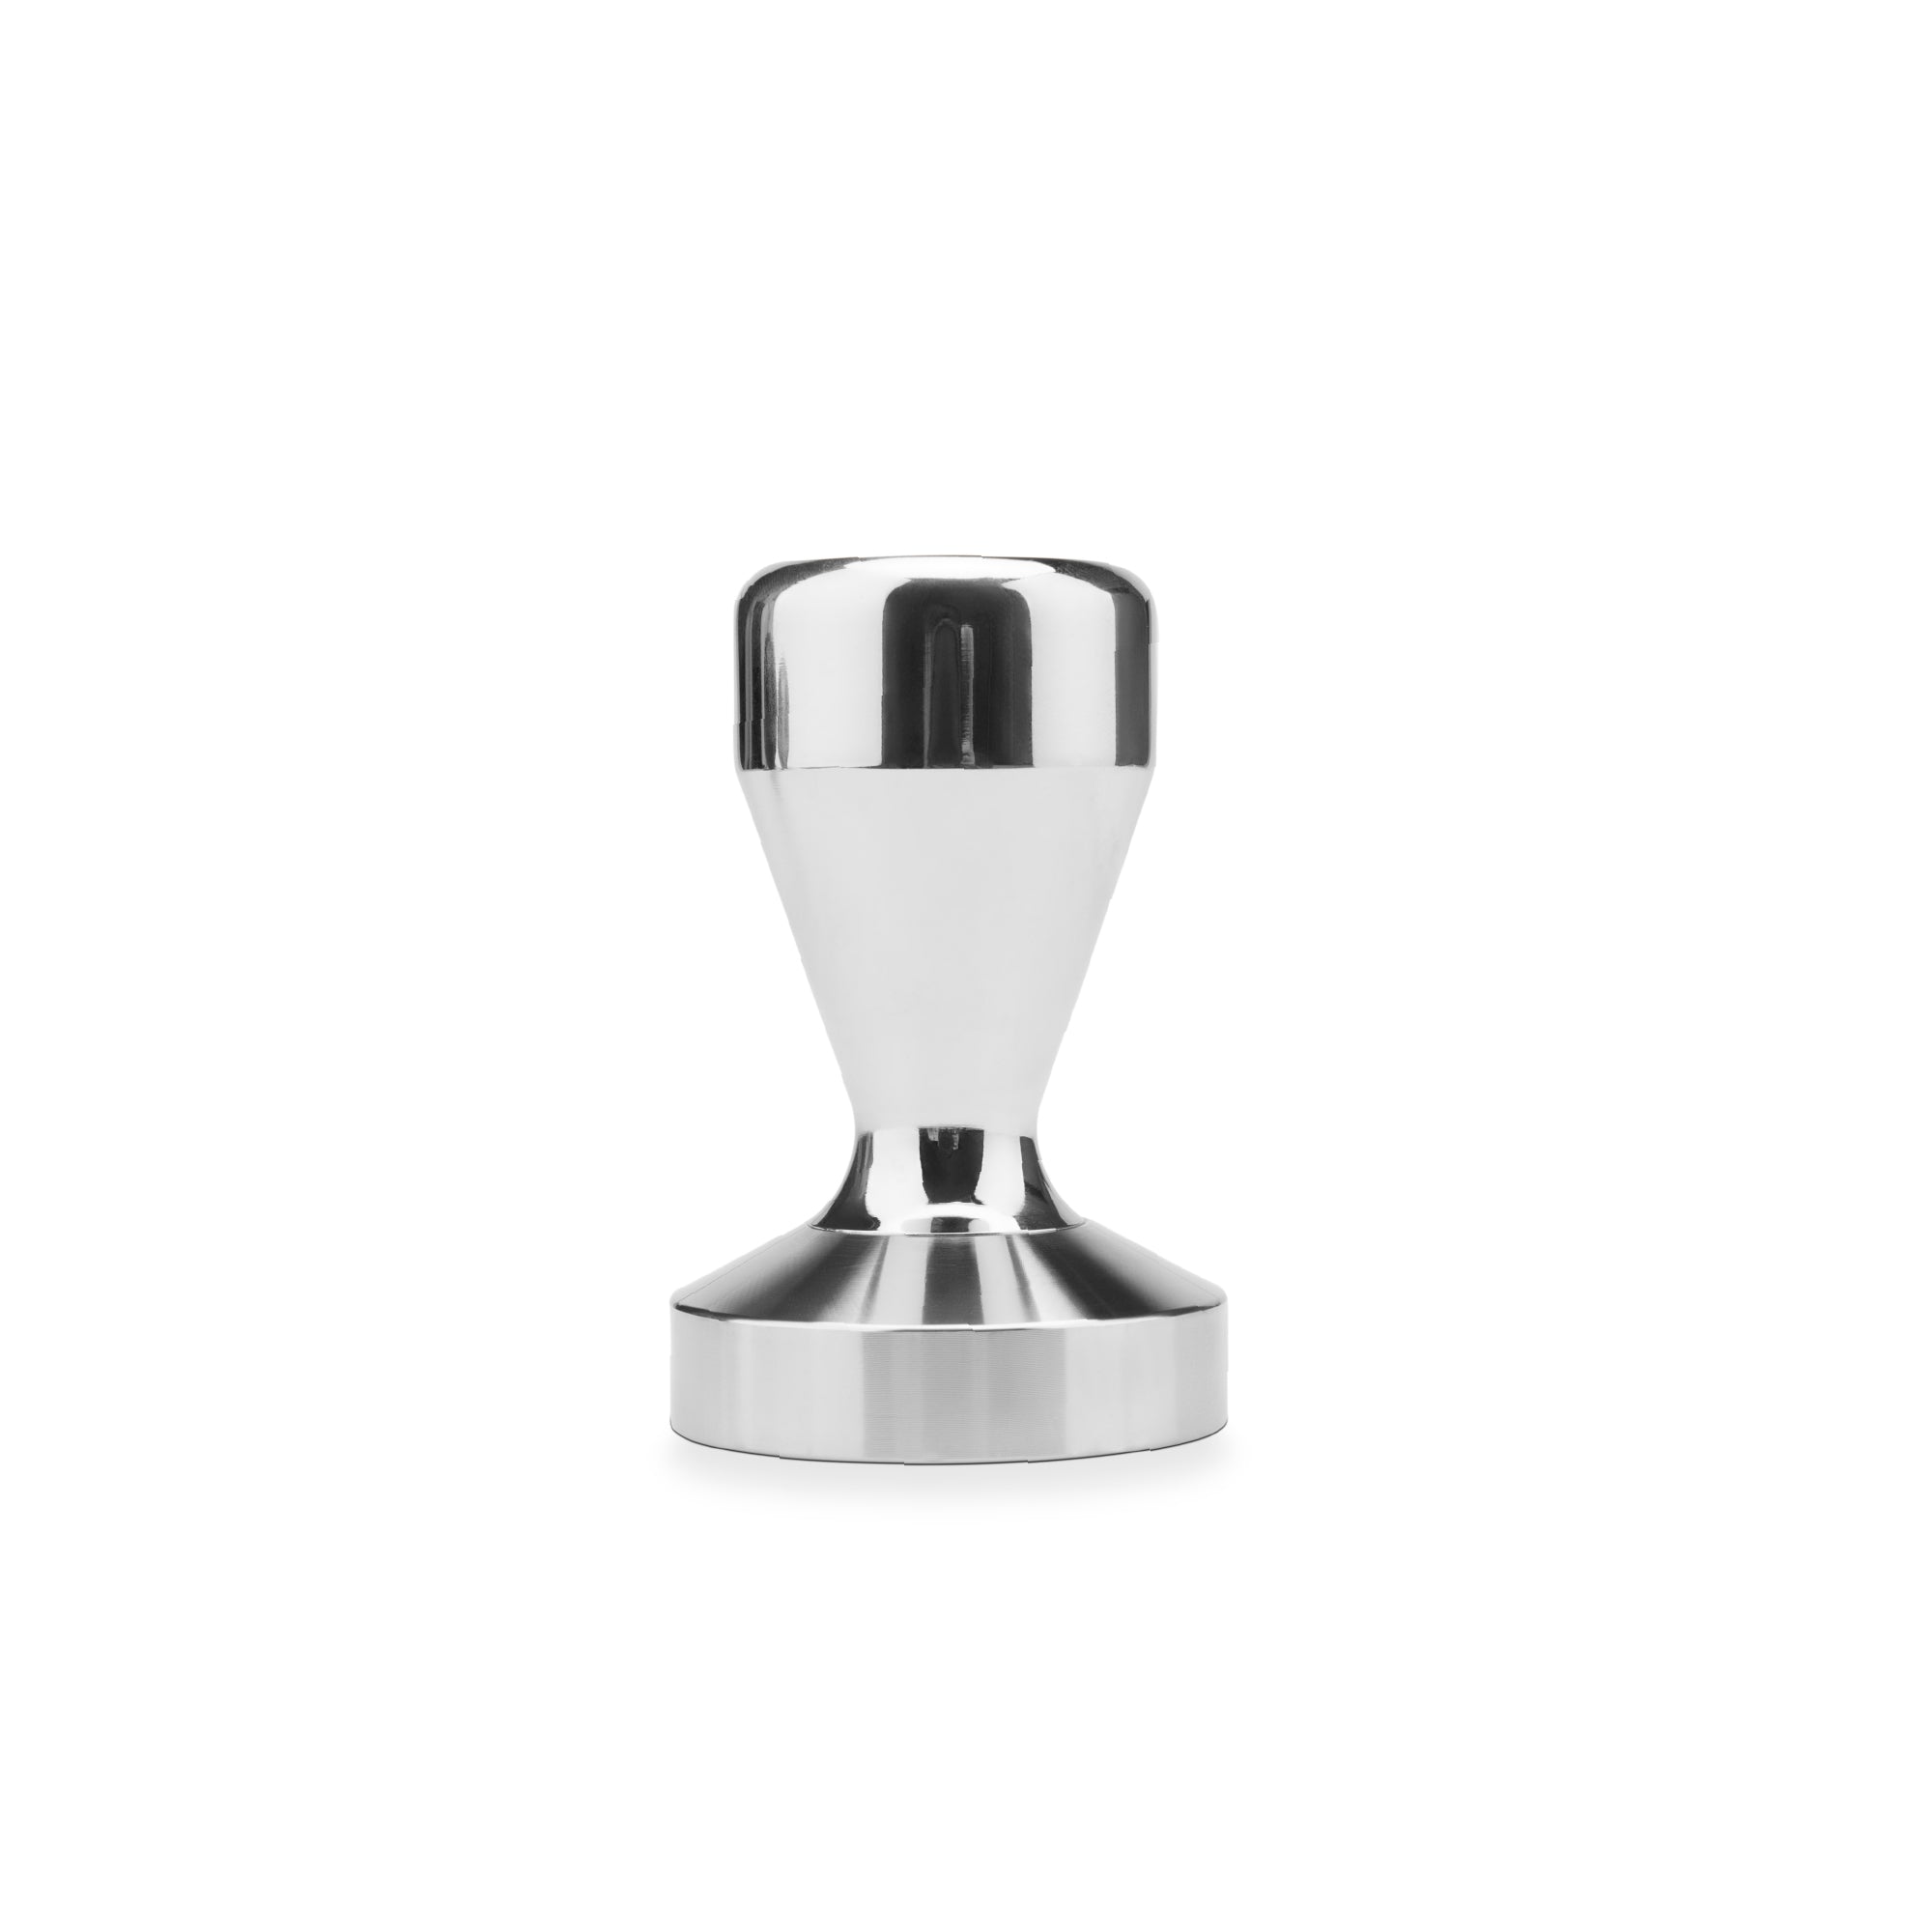 Coffee Tamper, Espresso Stainless Tamper Coffee Shop Supplies